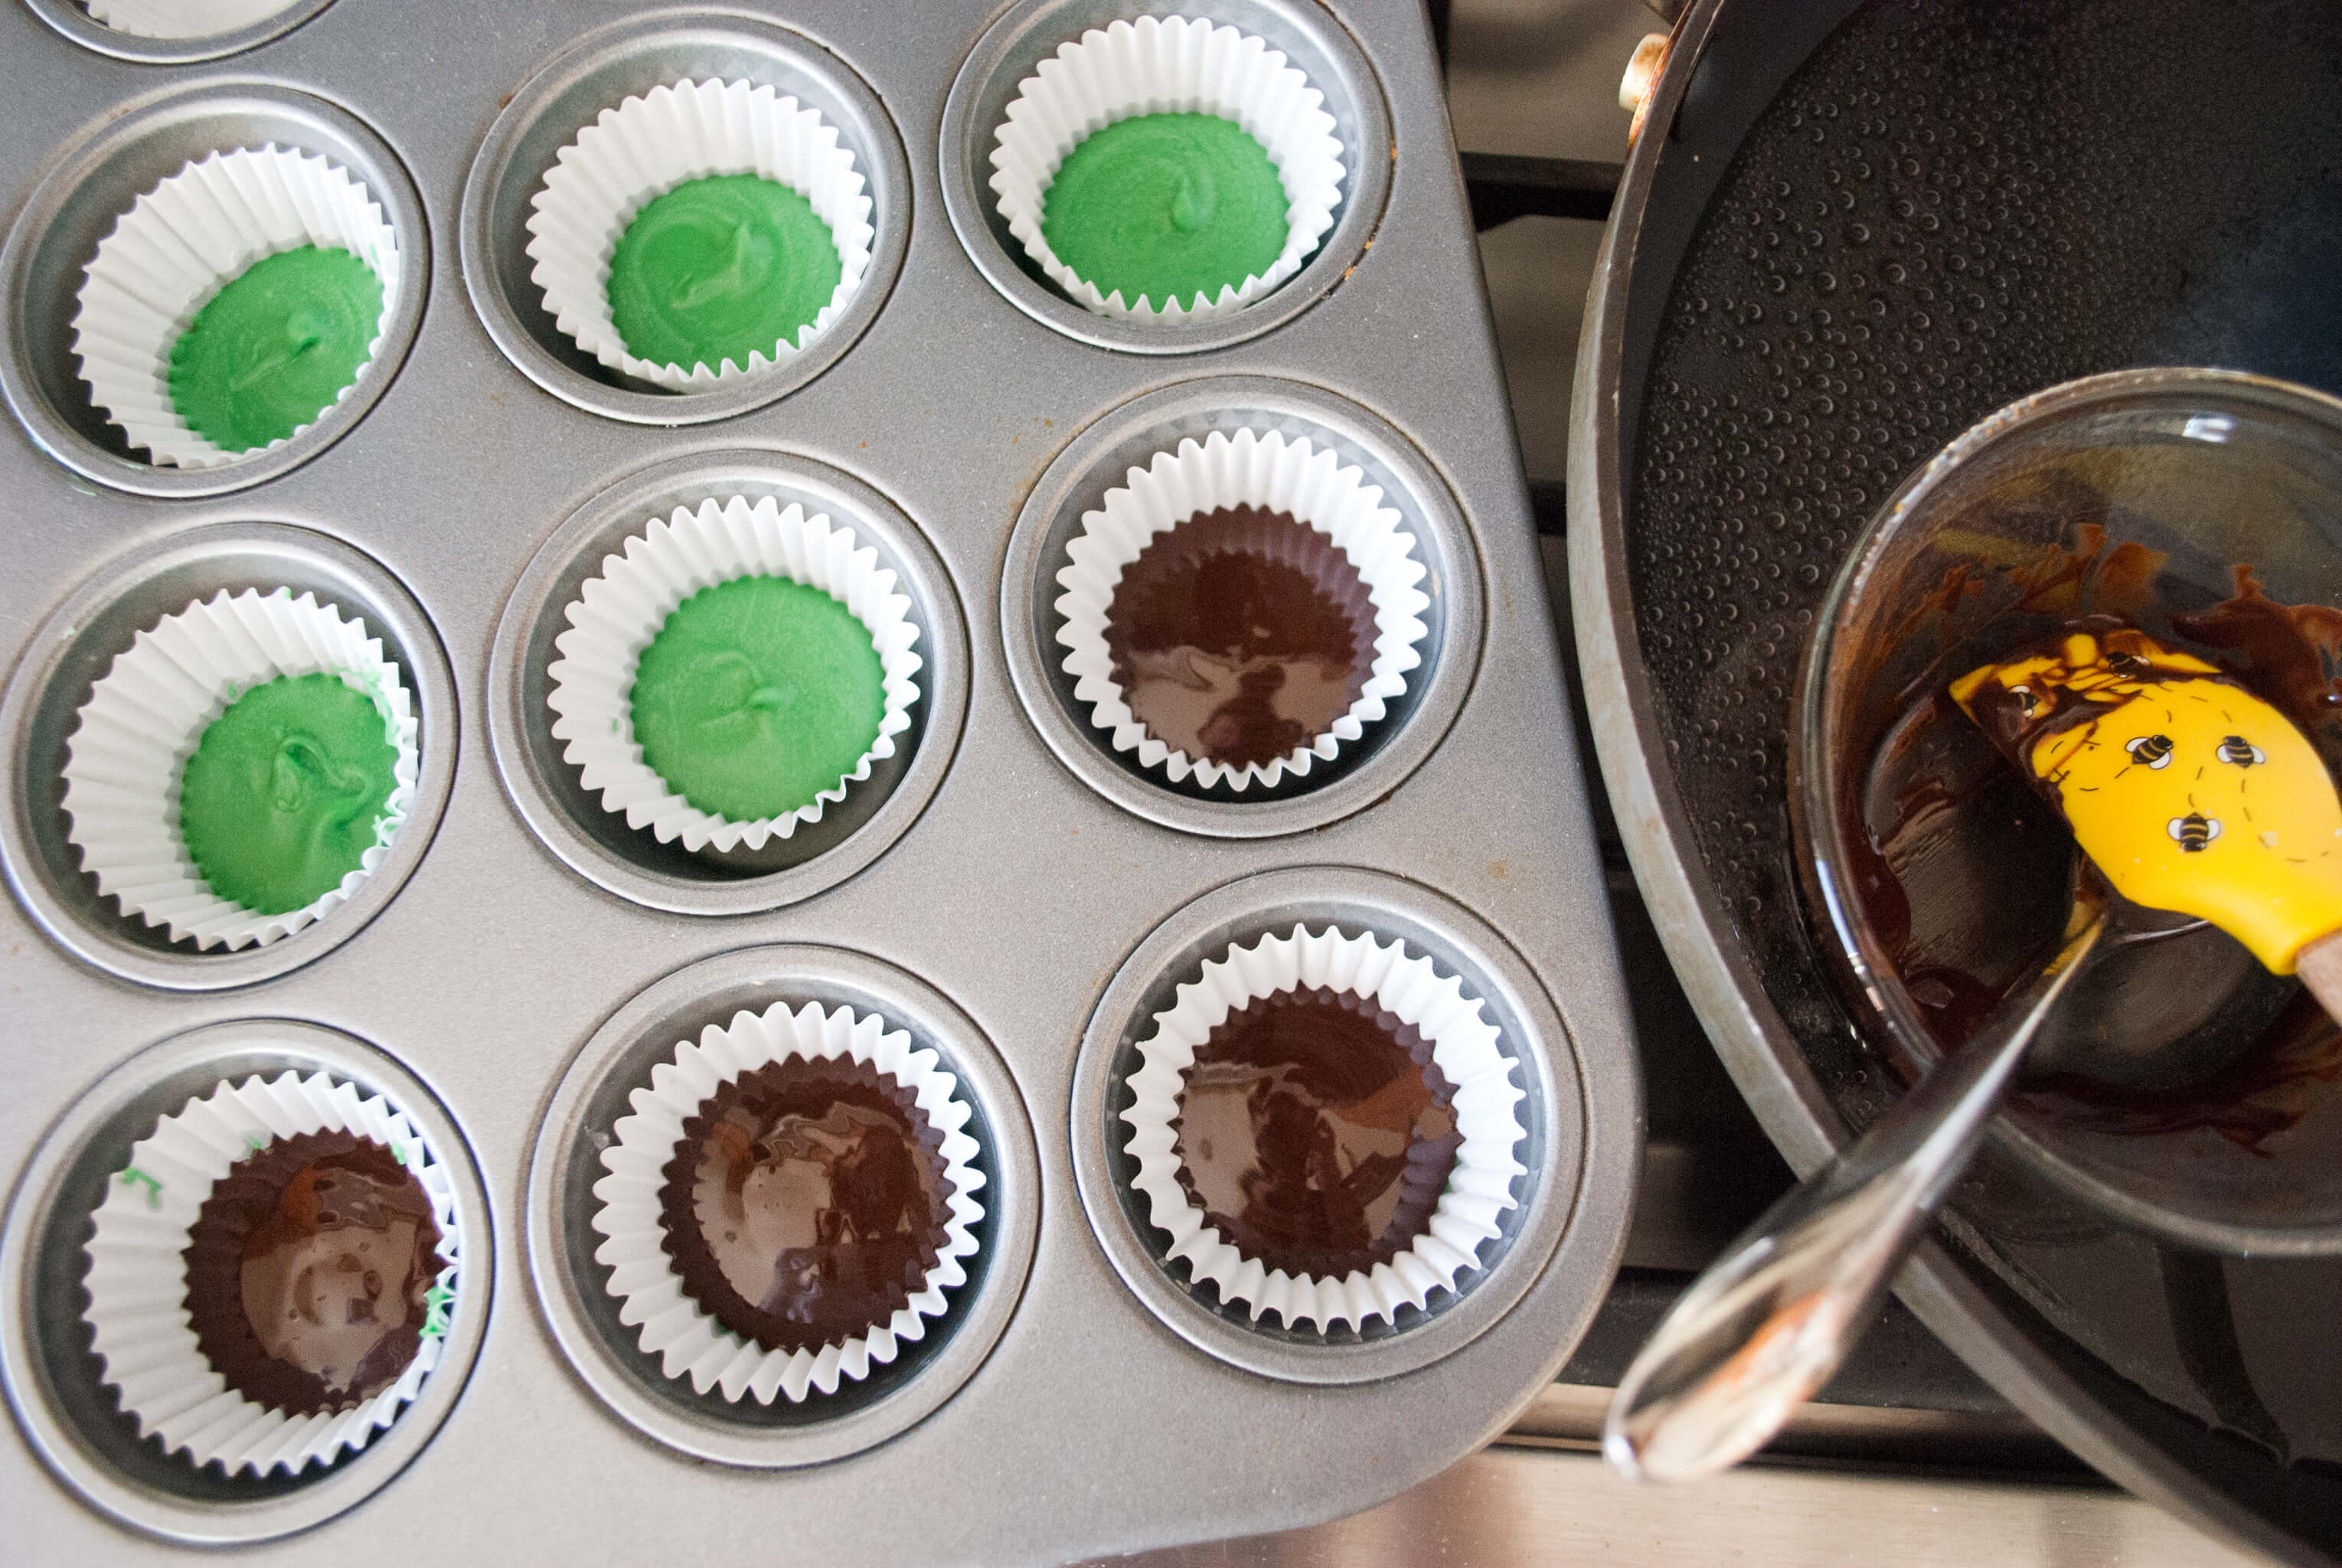 St. Patrick's Day Chocolate Peanut Butter Cups Recipe. Make these lucky green chocolate peanut butter cups for your little leprechauns.